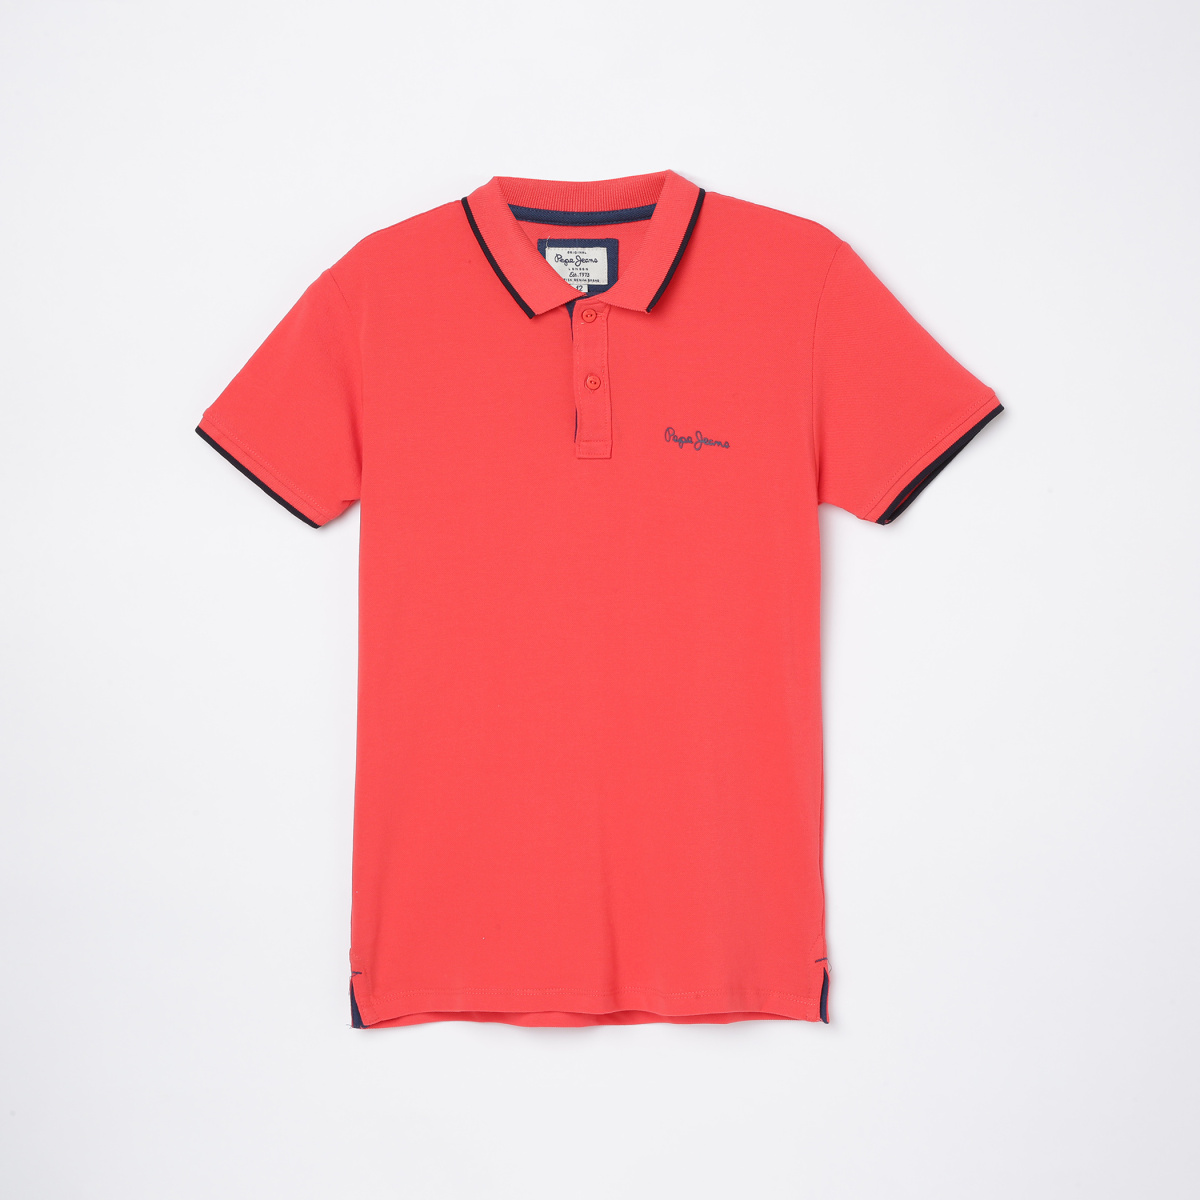 PEPE JEANS Boys Solid Polo T-shirt